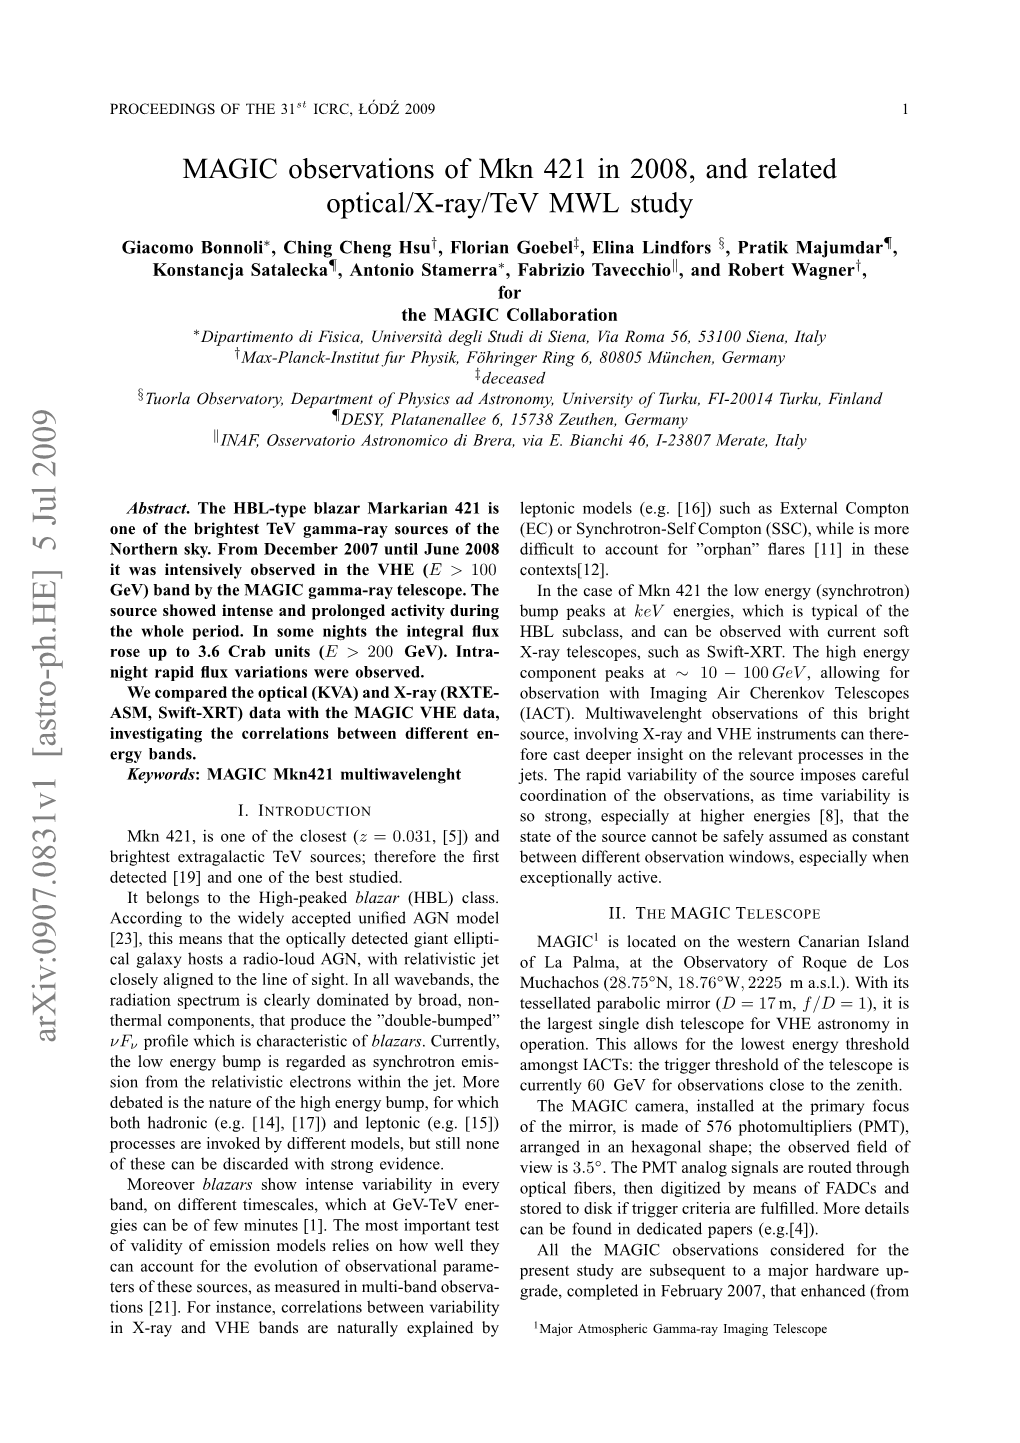 MAGIC Observations of Mkn 421 in 2008, and Related Optical/X-Ray/Tev MWL Study